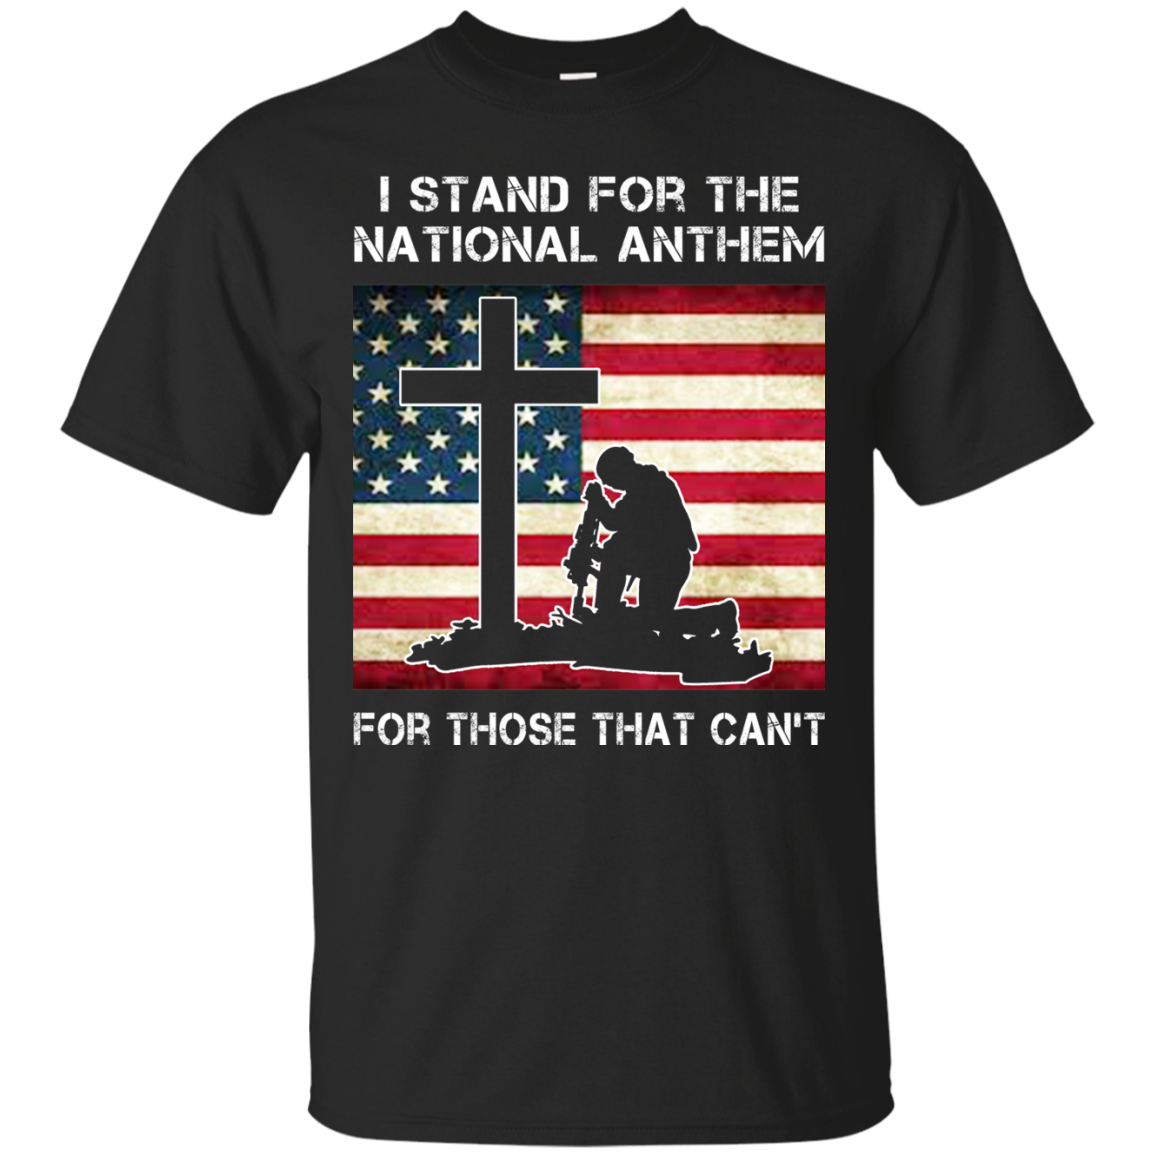 I Stand for the National Anthem shirt, hoodie, tank